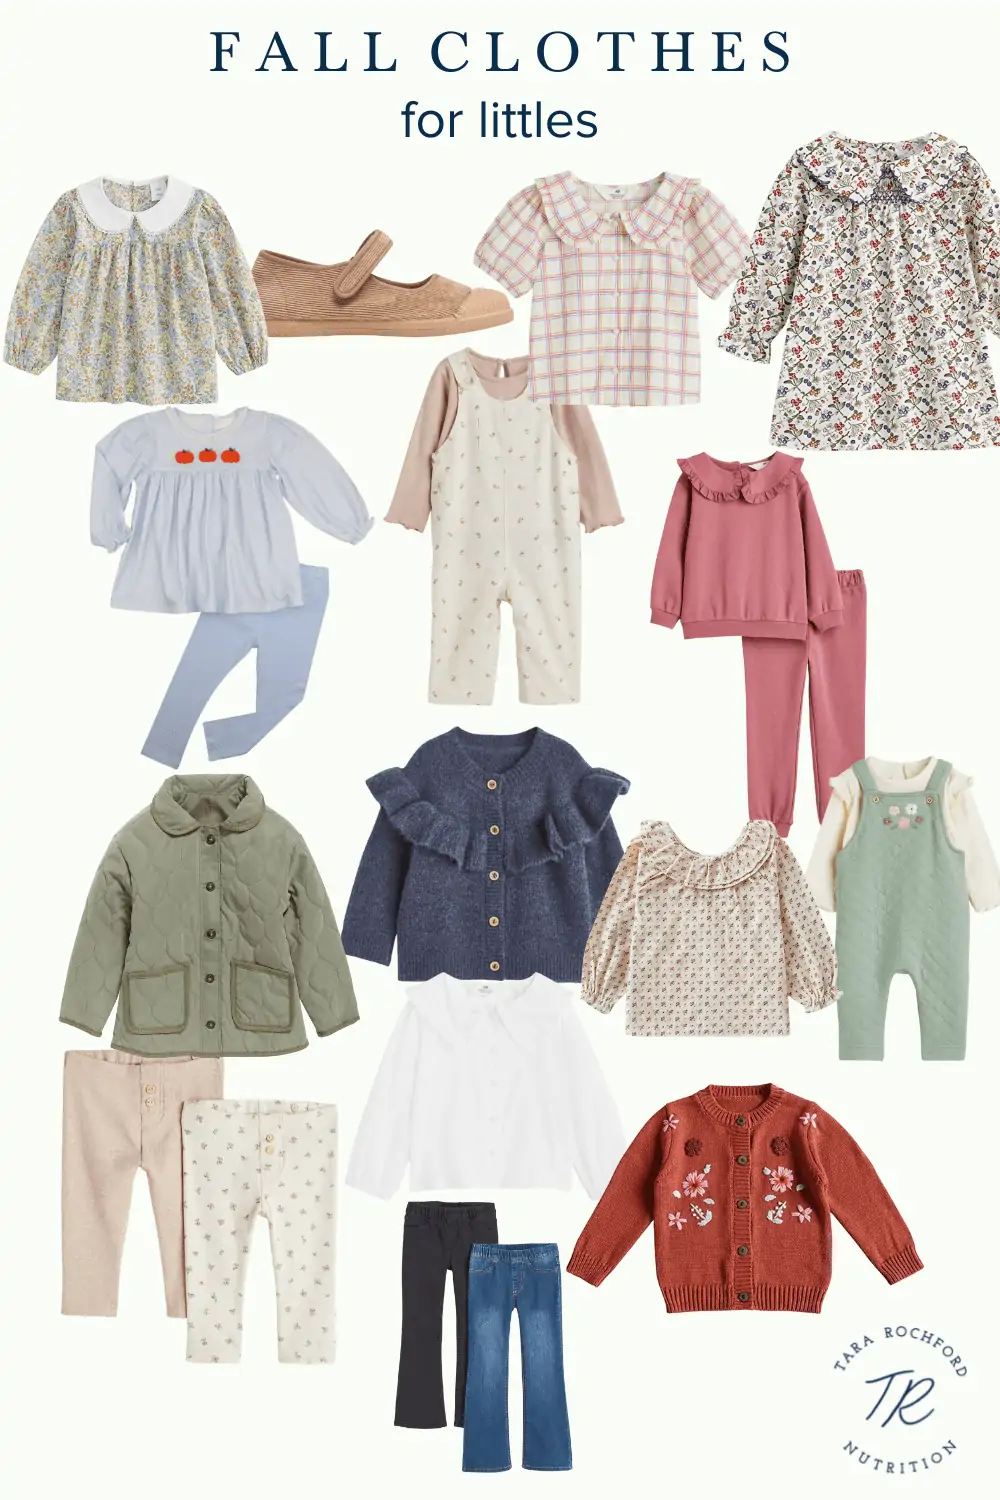 Fall clothes for littles